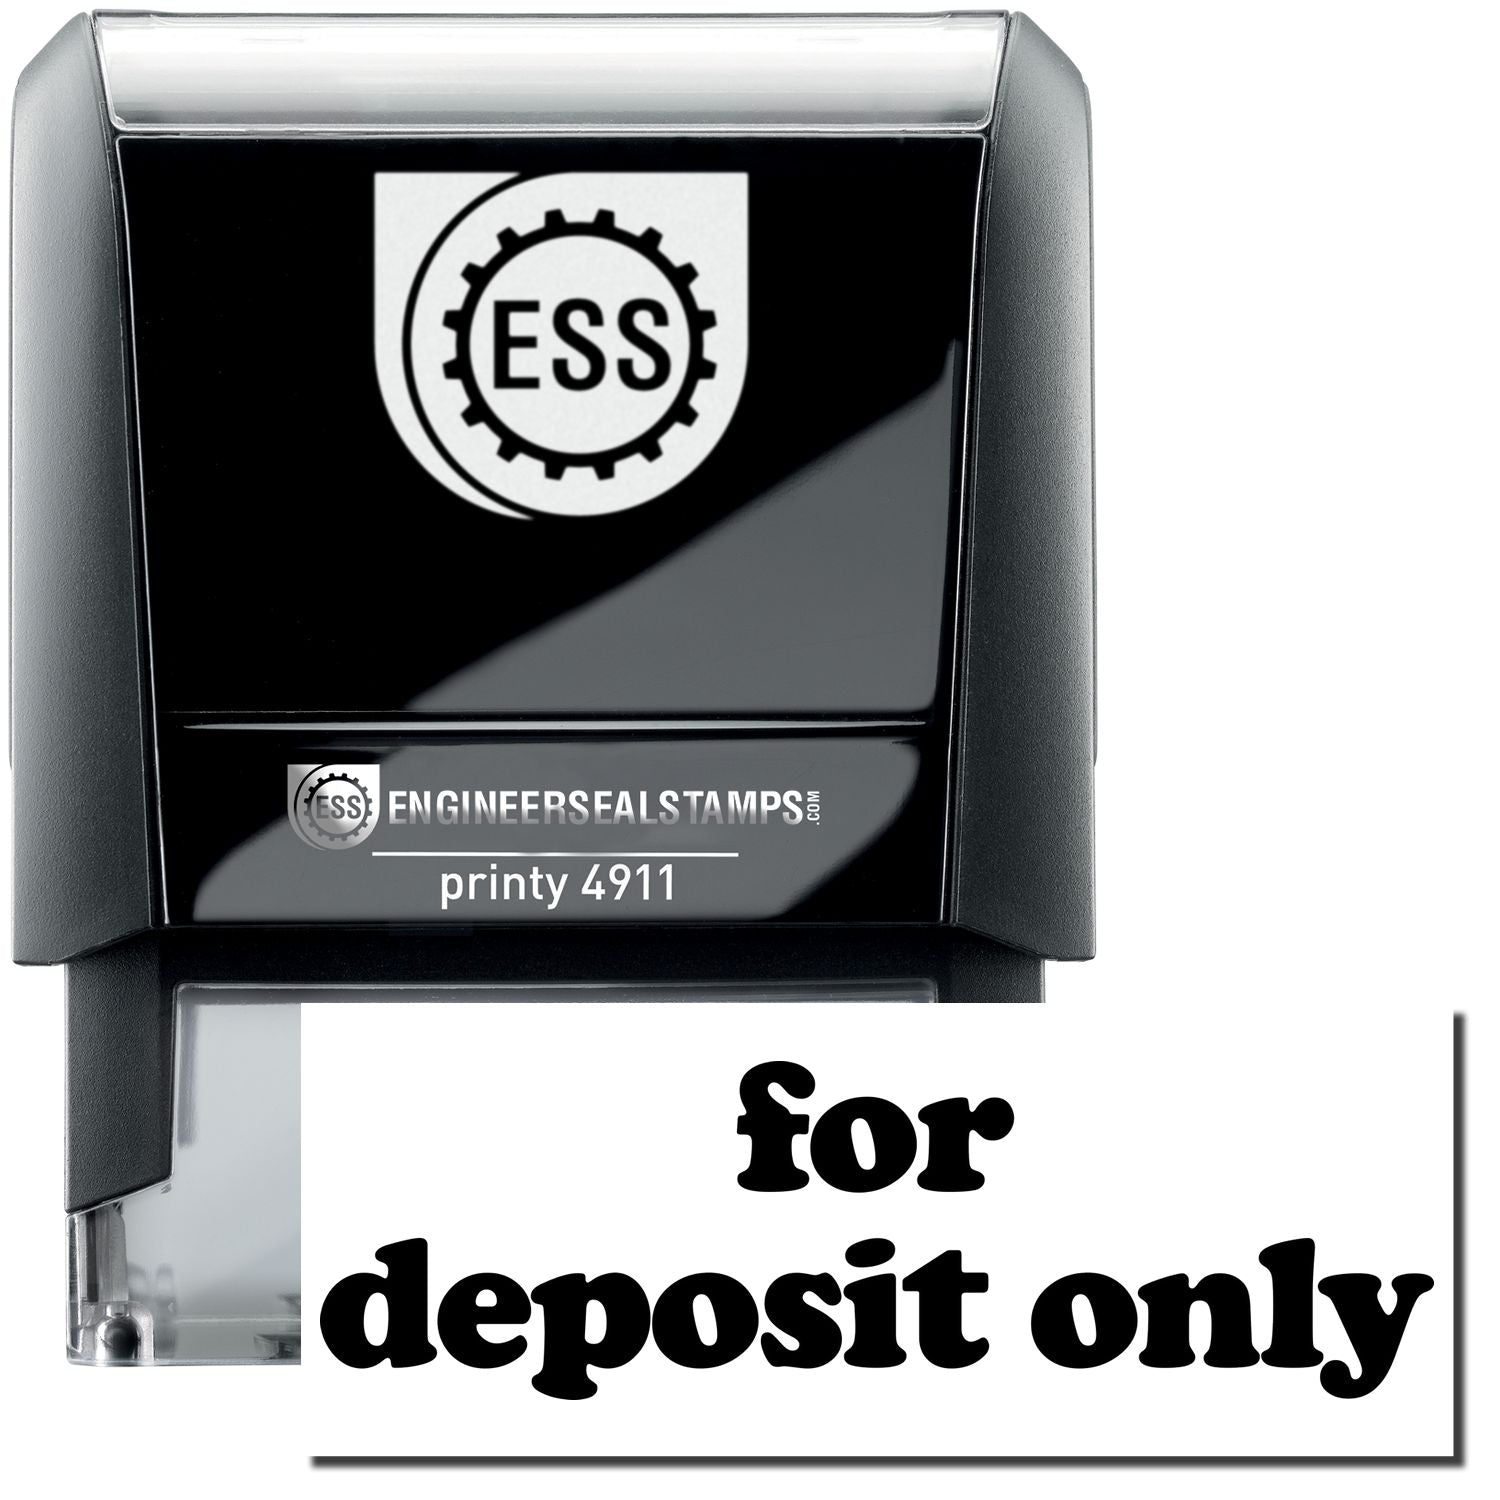 A self-inking stamp with a stamped image showing how the text "for deposit only" in lowercase letters is displayed after stamping.